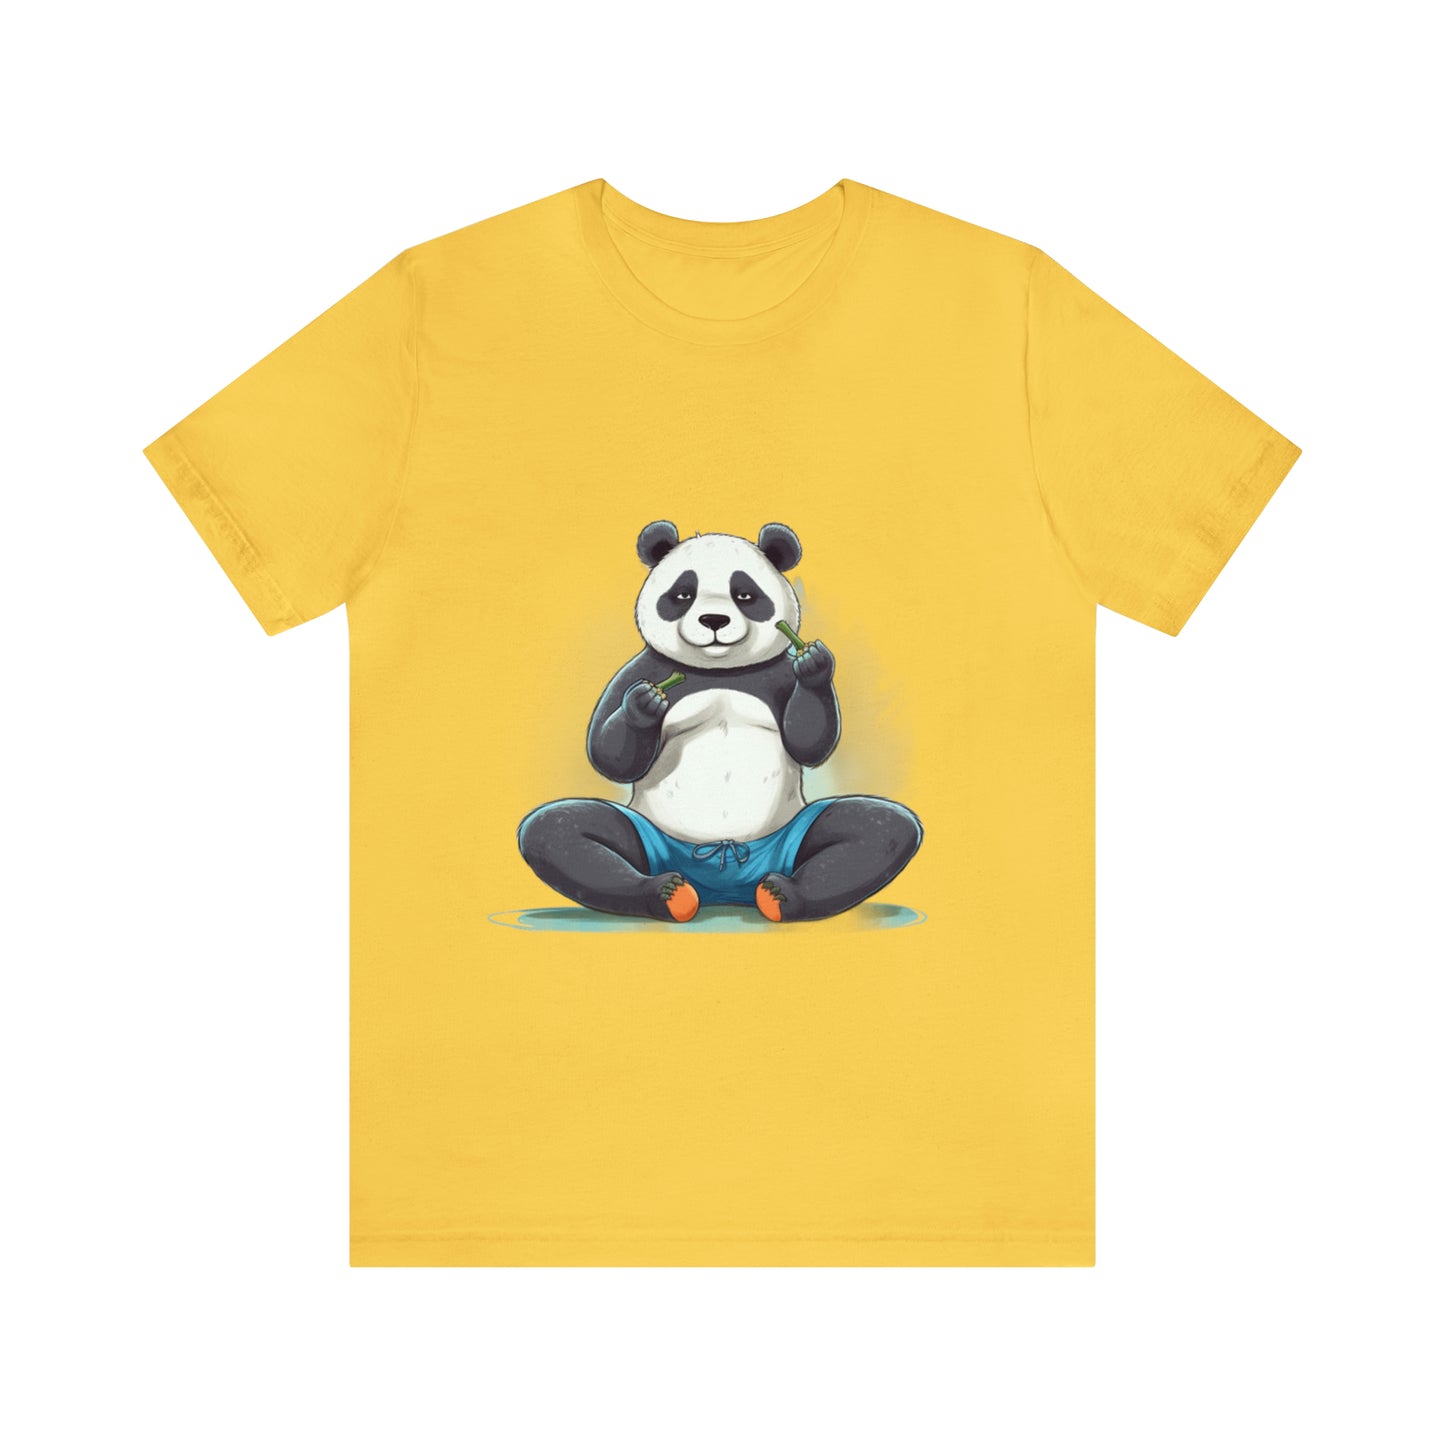 Panda Yoga Tee: For the Fit and Flexible